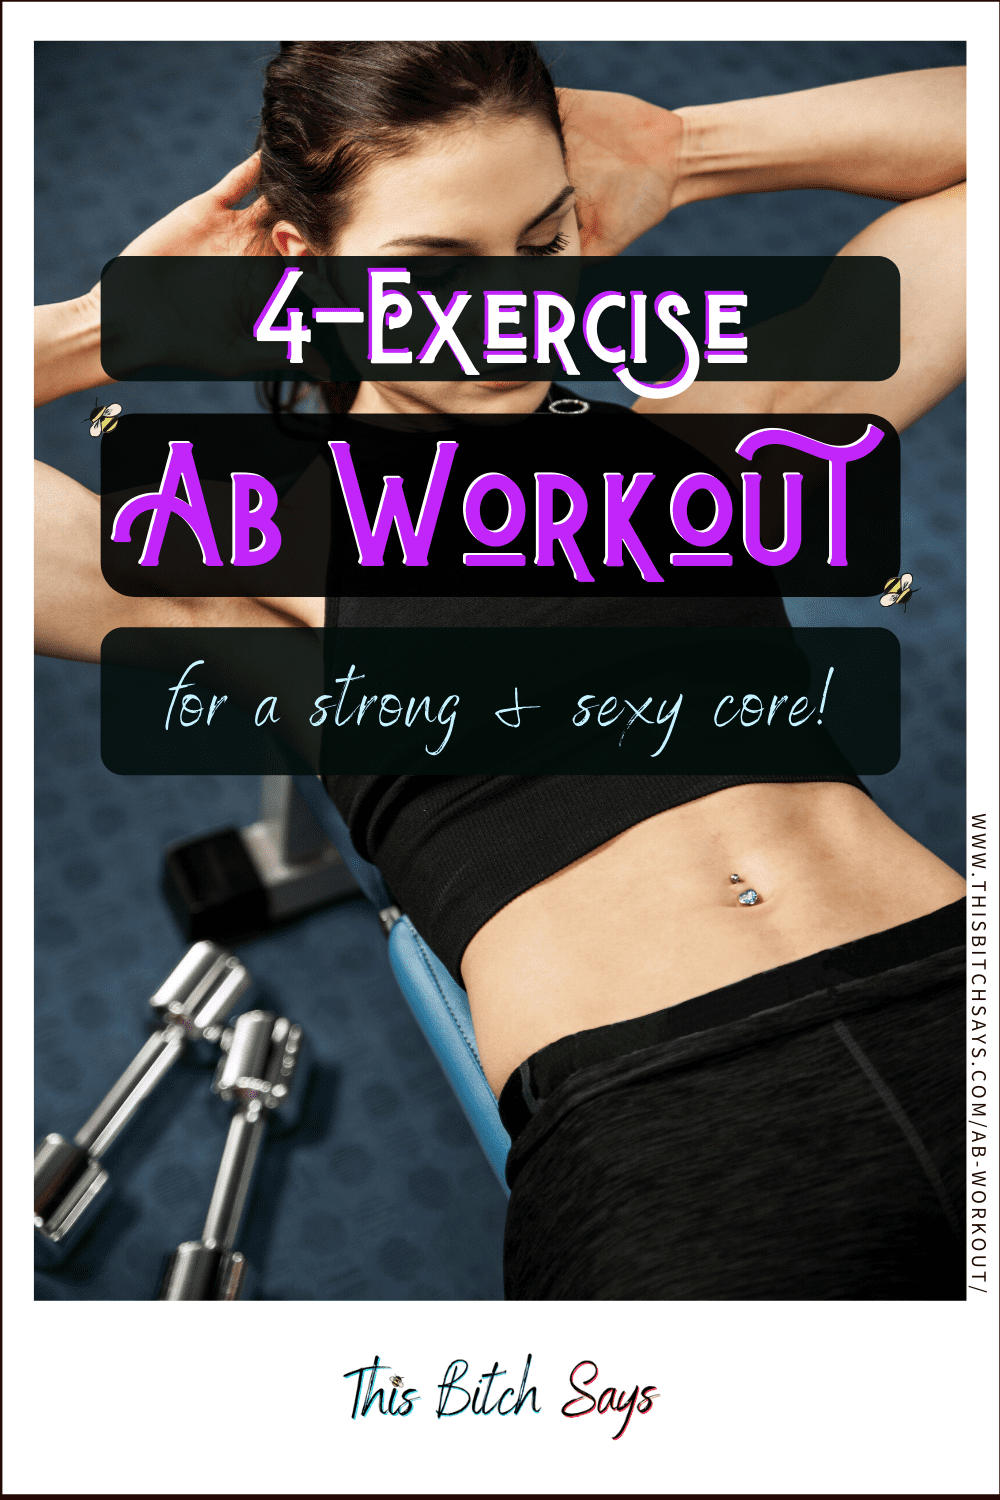 For Your Fitness: 4-exercise ab workout for a strong & sexy core!